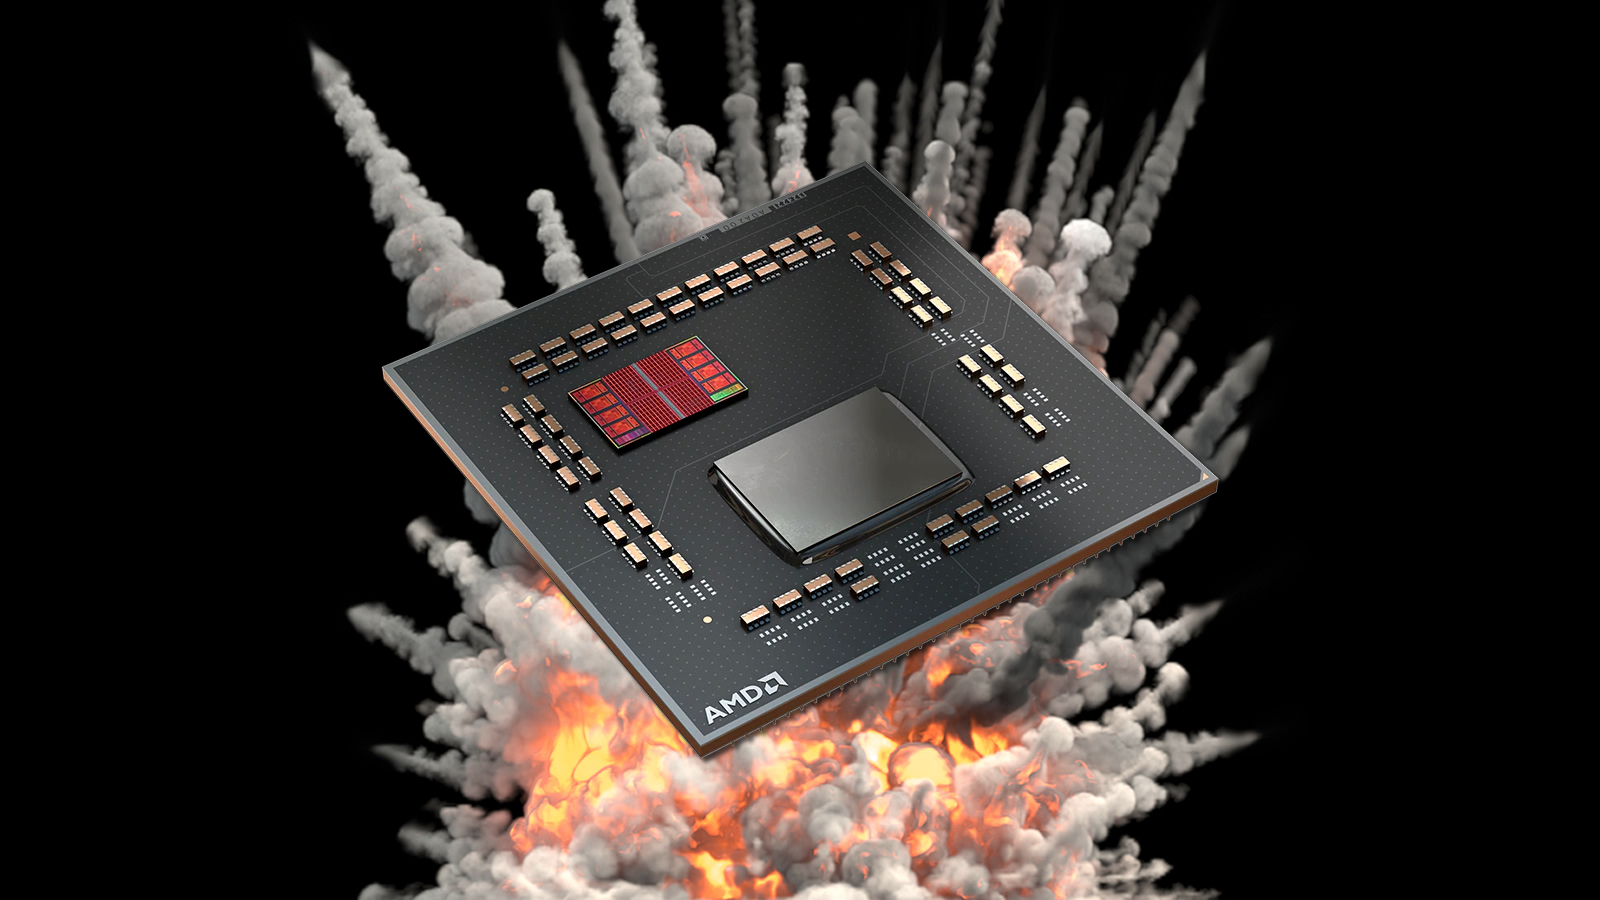 AMD’s Ryzen 7 5700X3D is now available to purchase